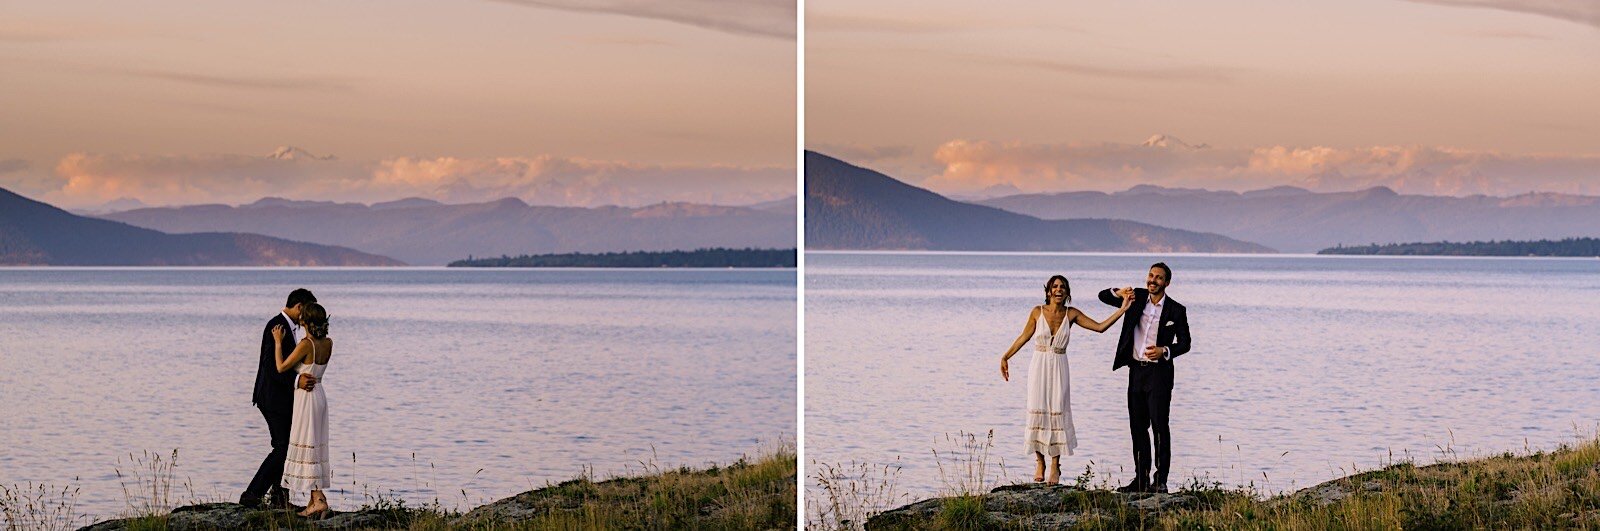 76_In_Island_On_mt._baker_Wedding_cliffside_With_portraits_Orcas_the_background.jpg